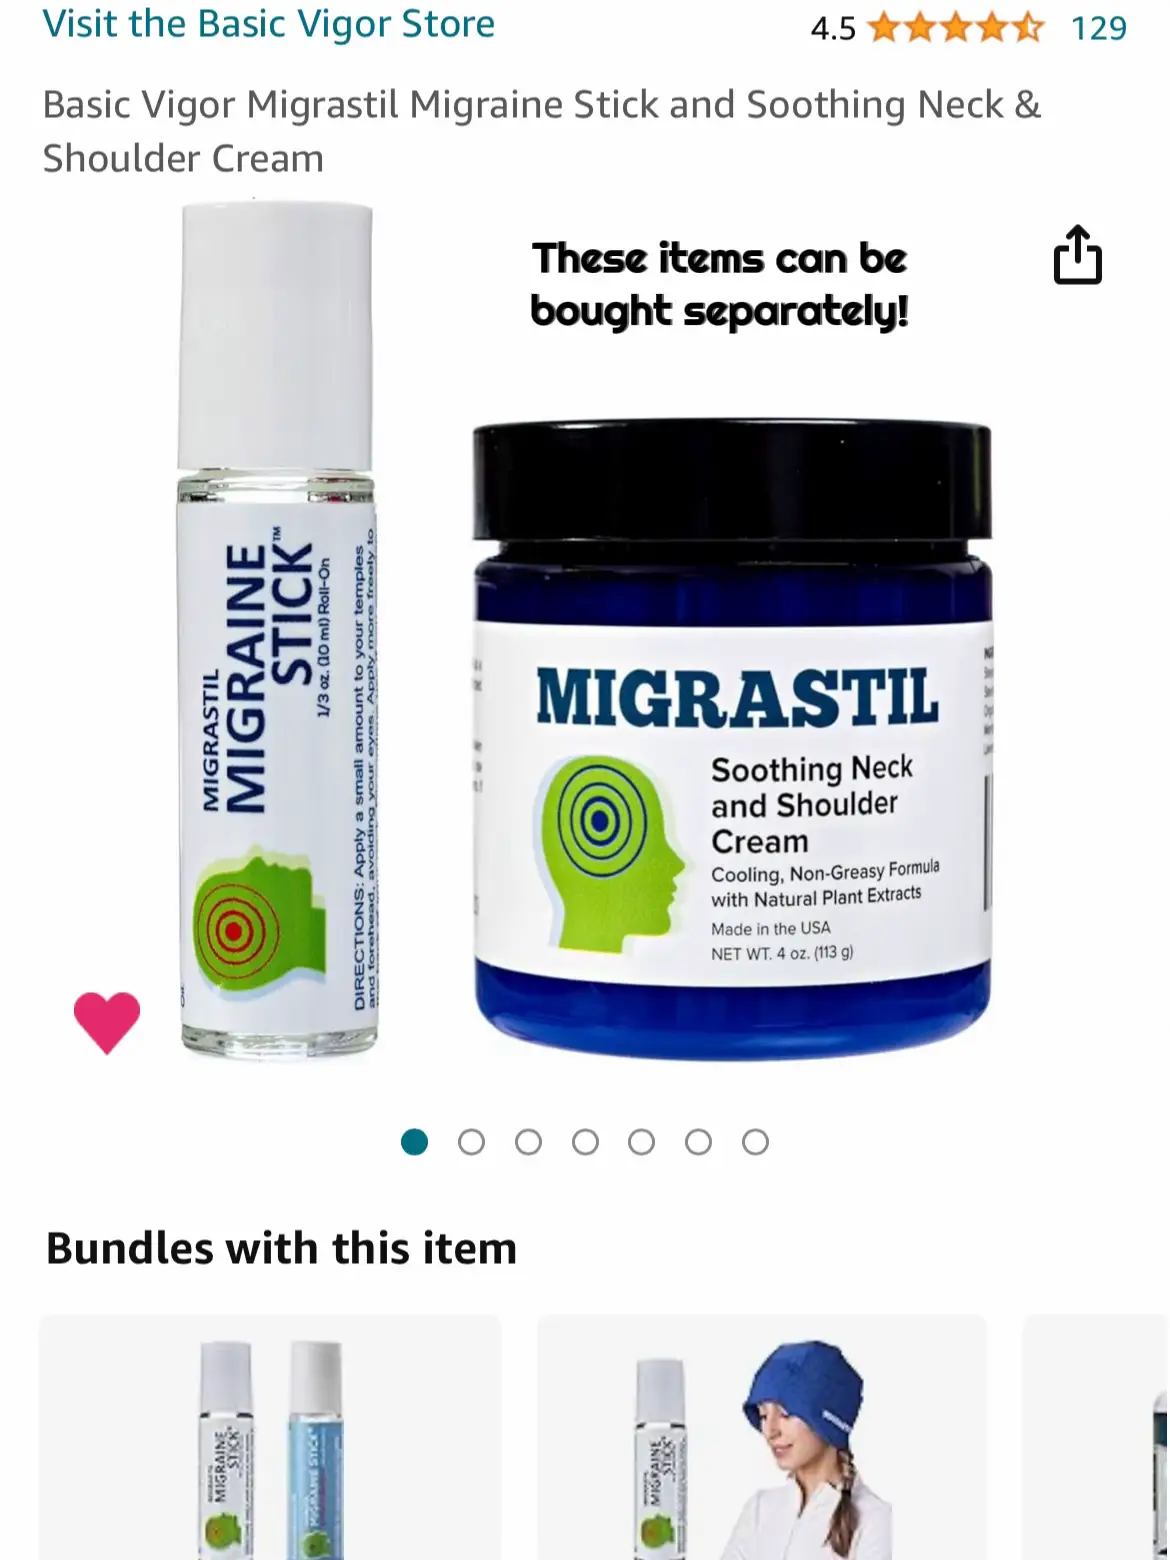 Basic Vigor Migrastil Migraine Stick® 3-Pack from Natural Migraine Roll-on.  Made in The USA. with Peppermint, Spearmint and Lavender Essential Oils.